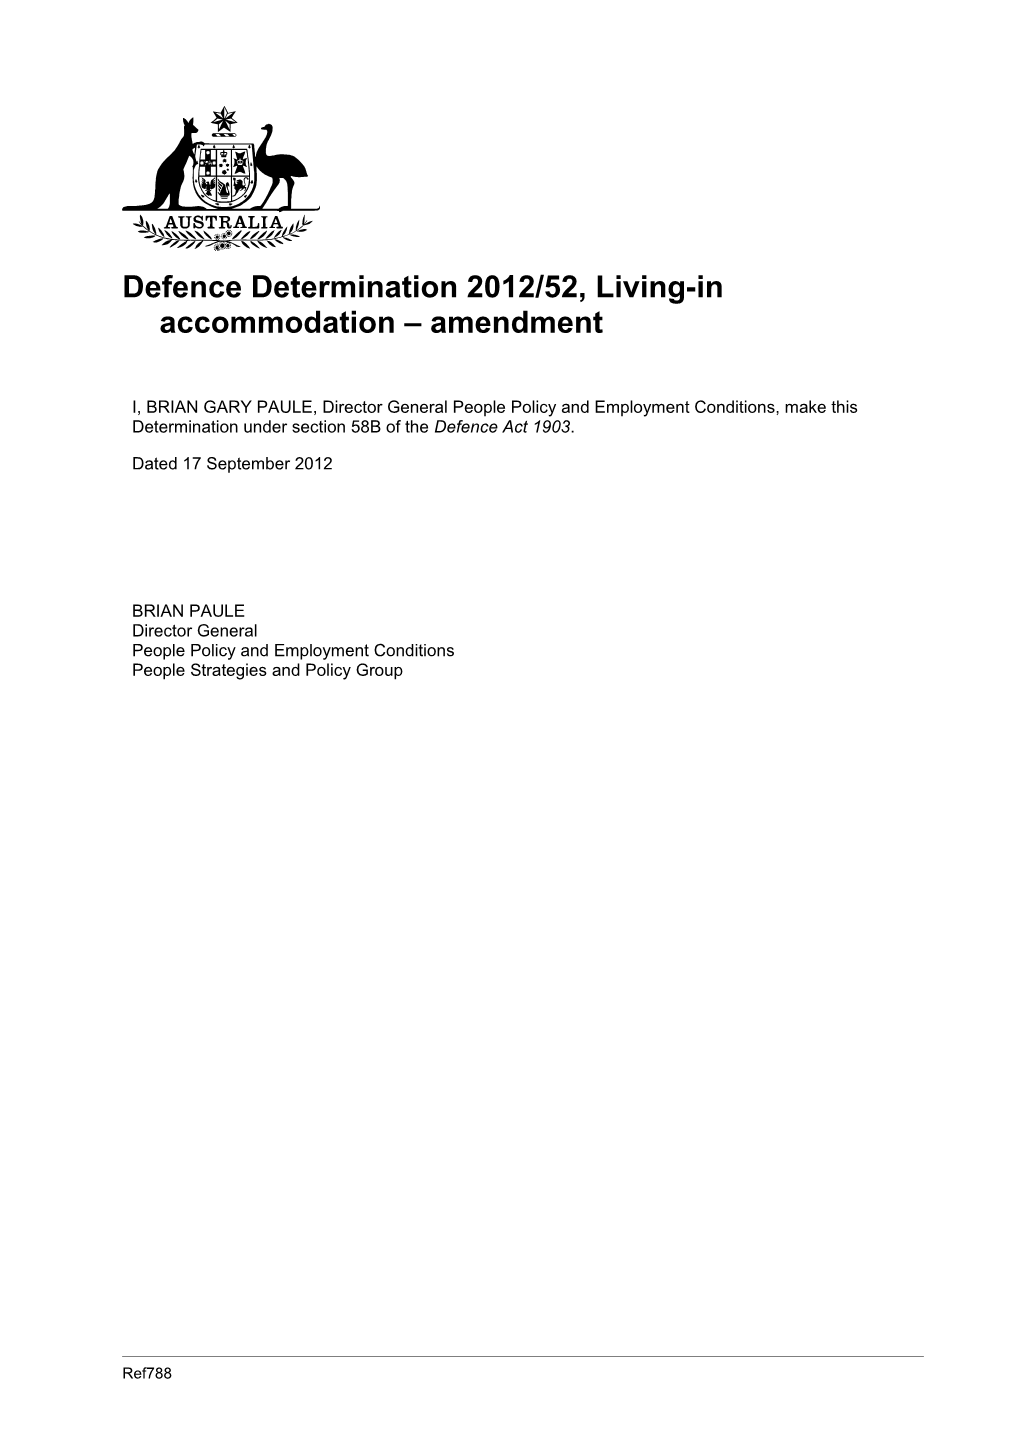 Defence Determination 2012/52, Living-In Accommodation Amendment